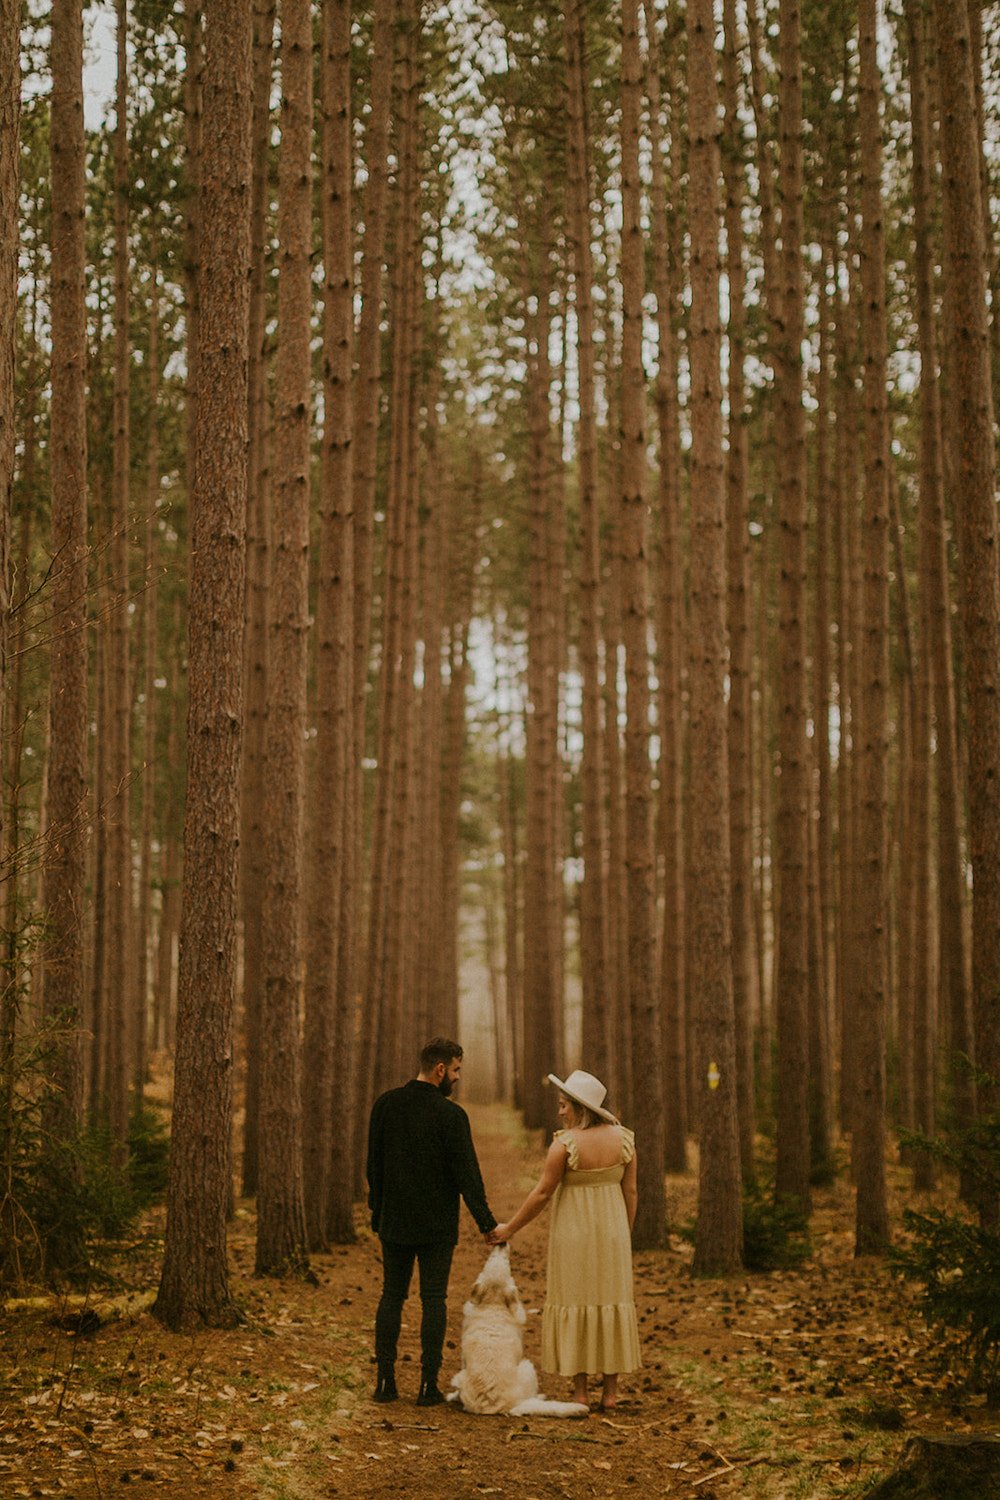 Couple admiring the woods while holding hands. Dog sitting between them.